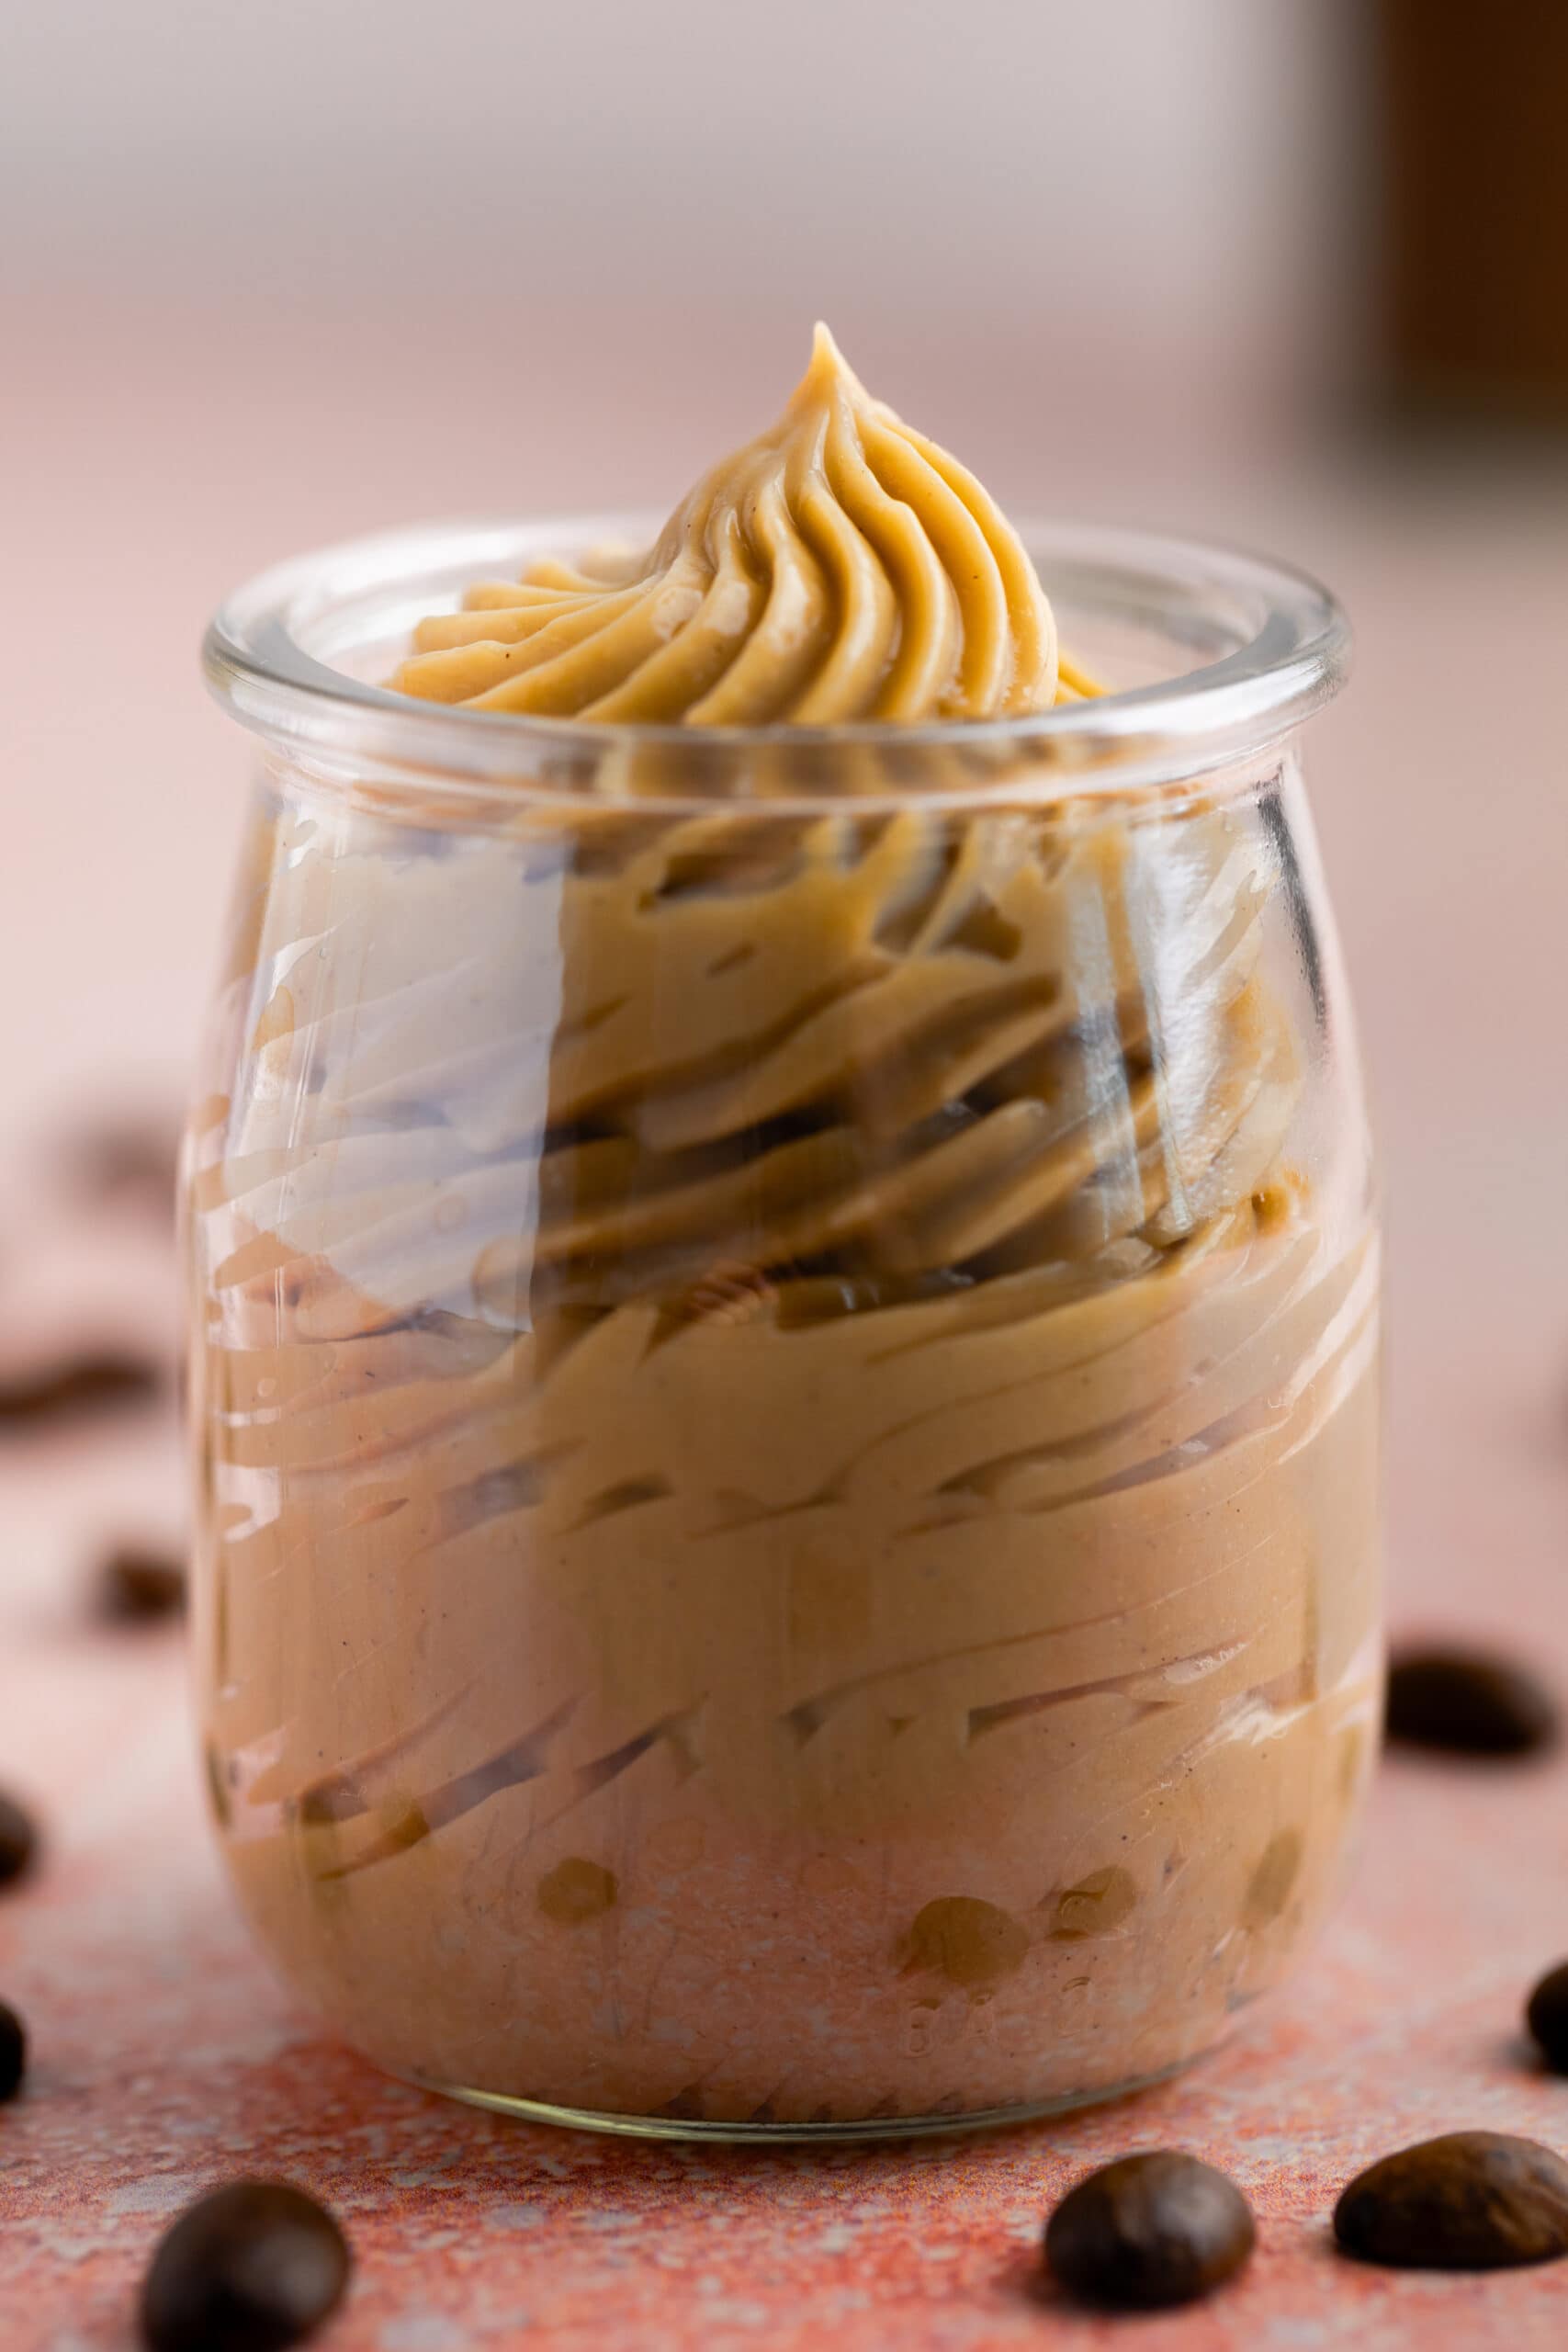 Creamy coffee pastry in a glass